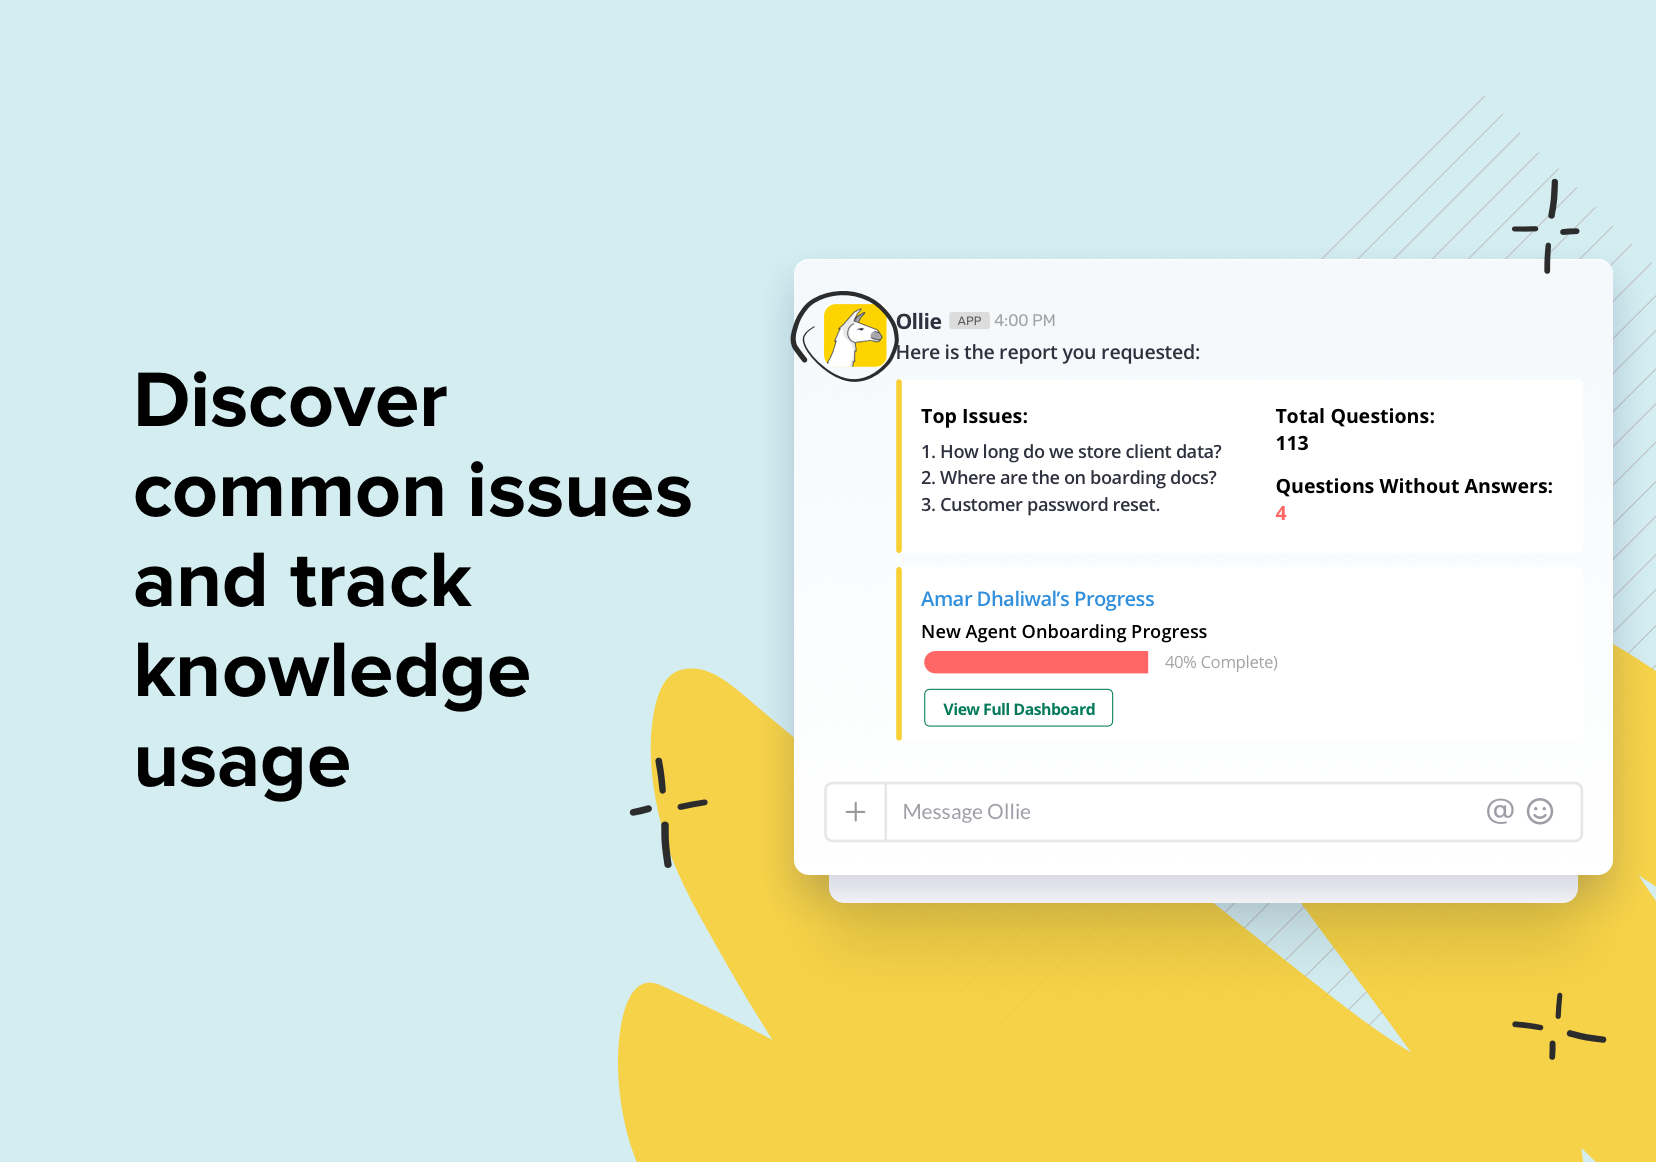 Discover common issues and track knowledge usage with powerful analytics.